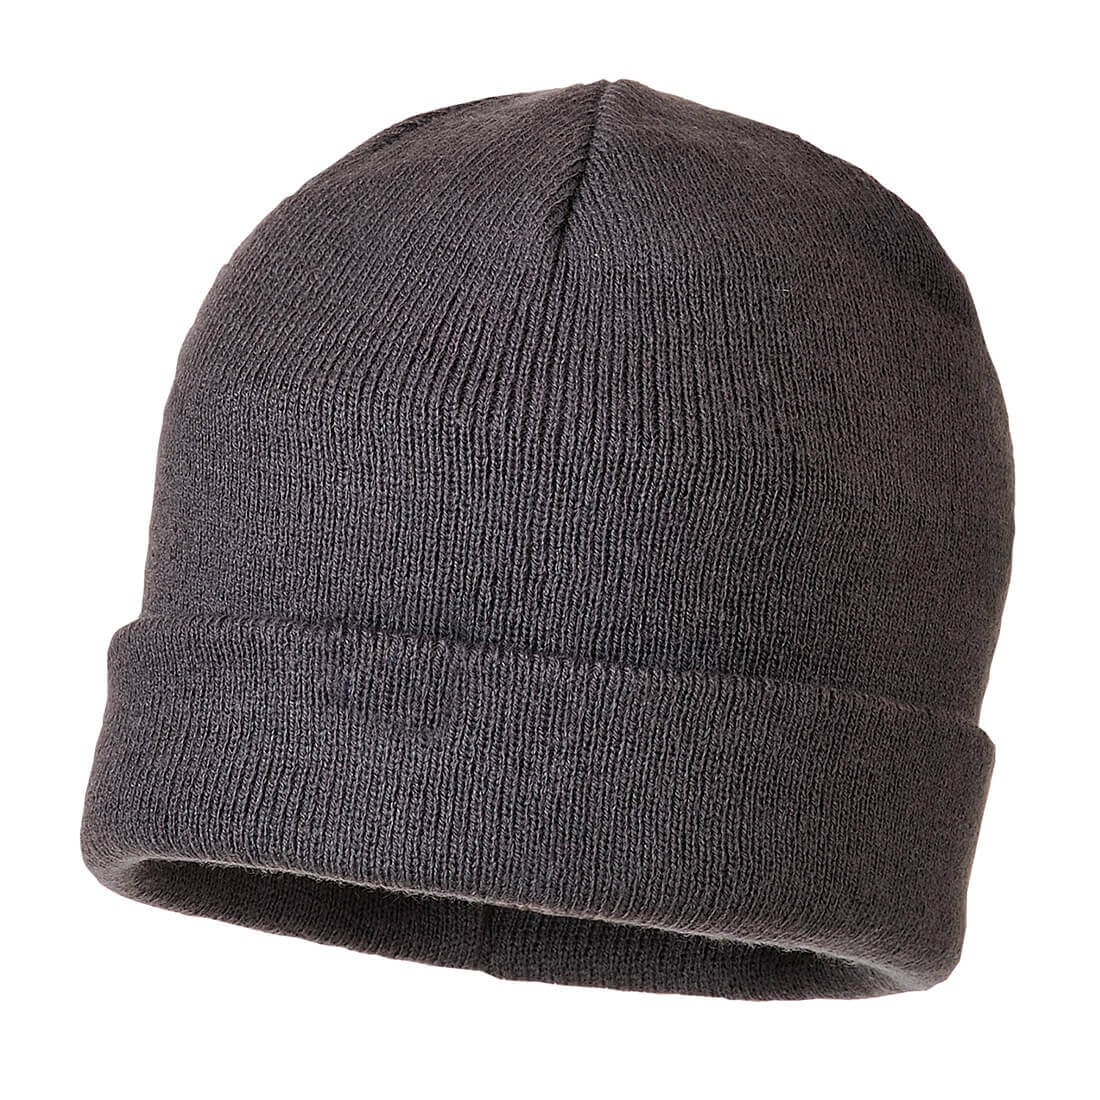 Image of Portwest Insulatex Lined Knit Hat Grey One Size